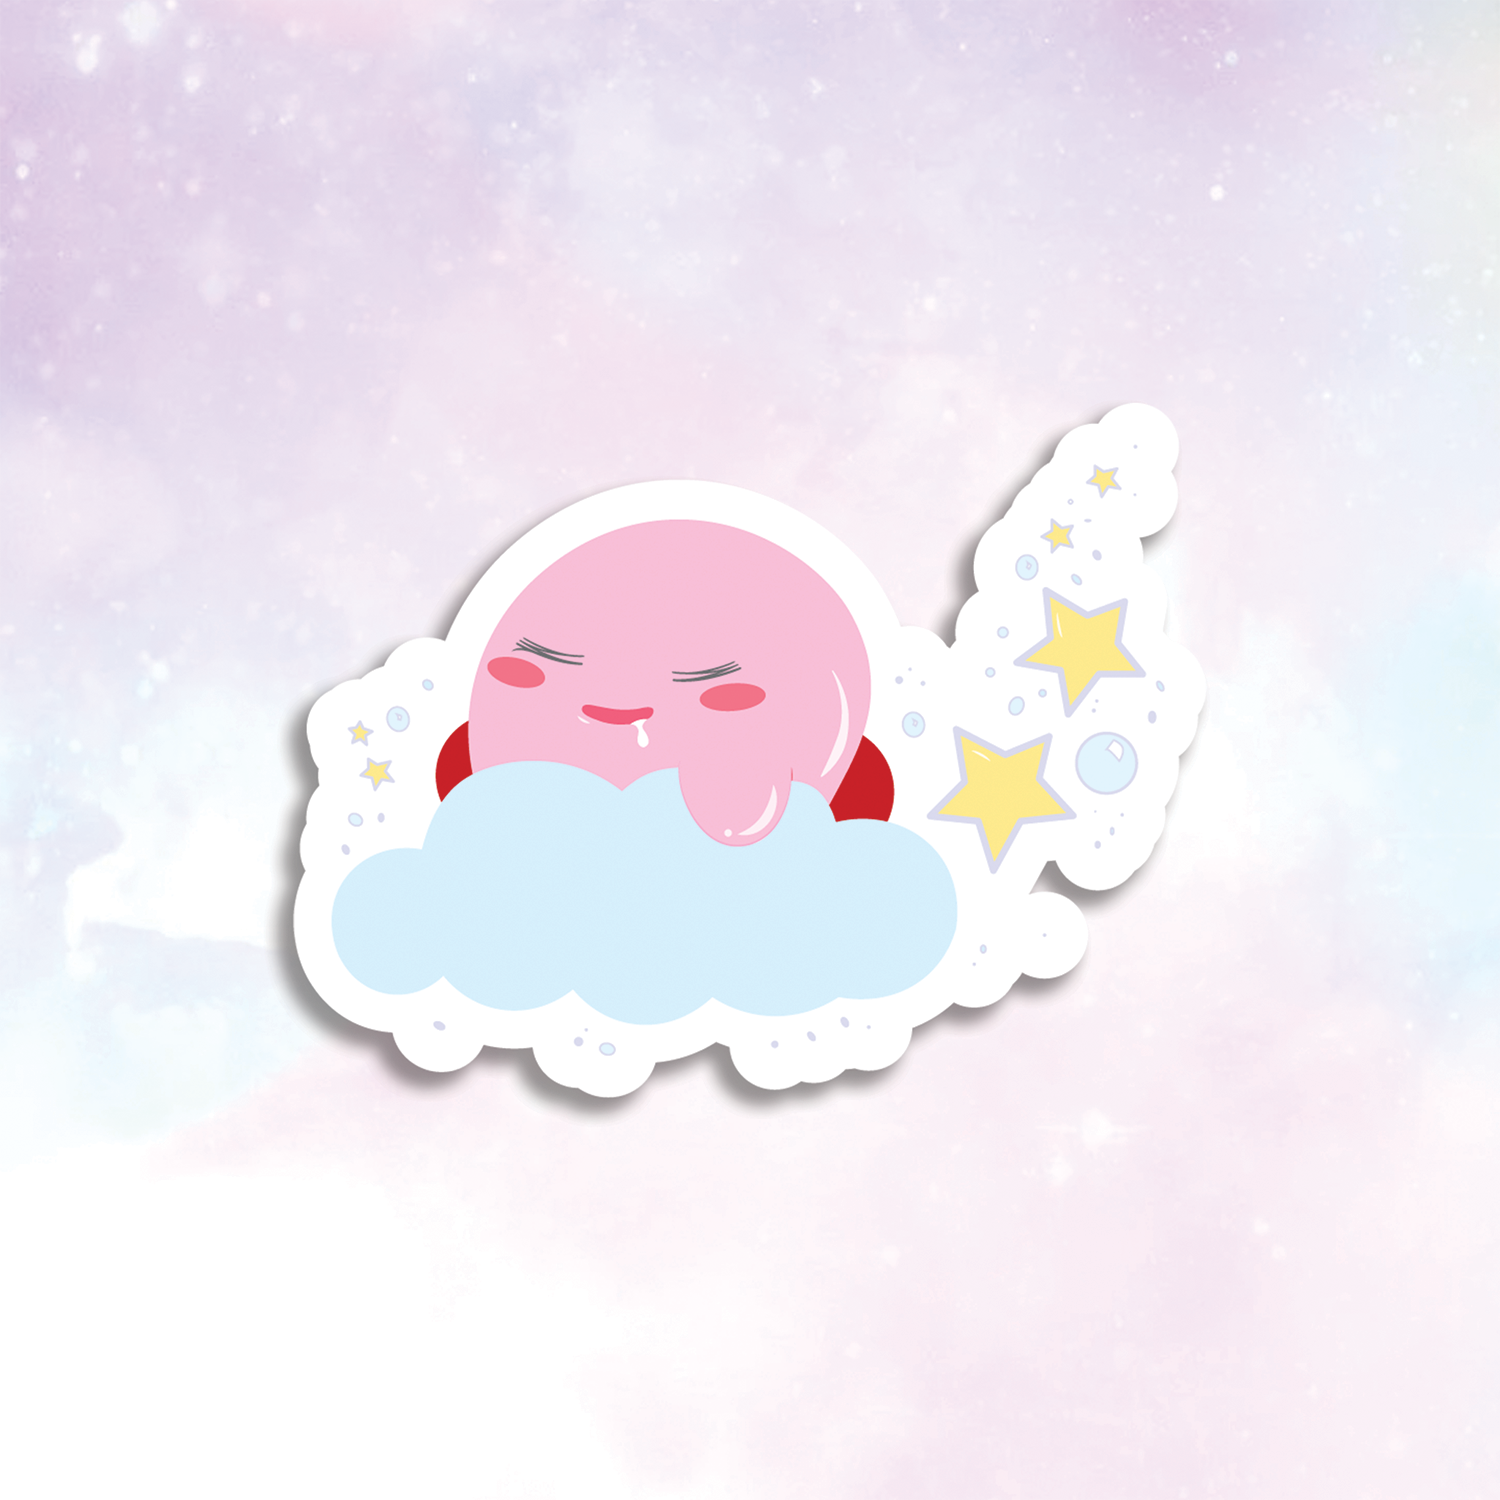 Sleeping Kirby Sticker design features Kirby sleeping on a cloud ornamented with stars and bubbles, meanwhile drooling while he snores.